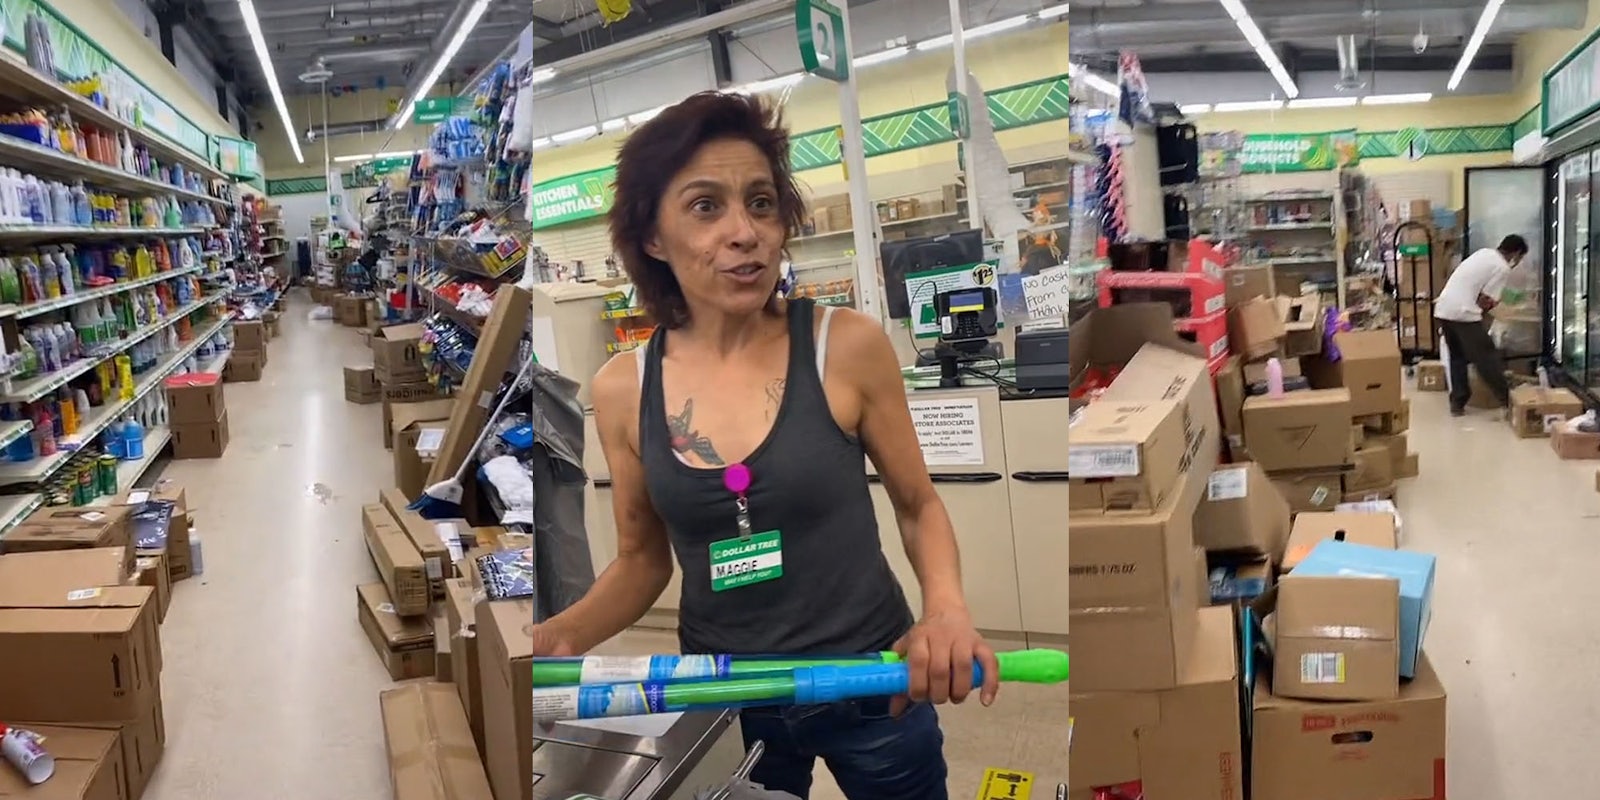 Dollar tree aisle with boxes everywhere and things falling off of shelves (l) dollar tree cashier holding bubble wants talking behind register (c) dollar tree aisle with man shopping in freezer section with boxes surrounding him and other aisles (r)